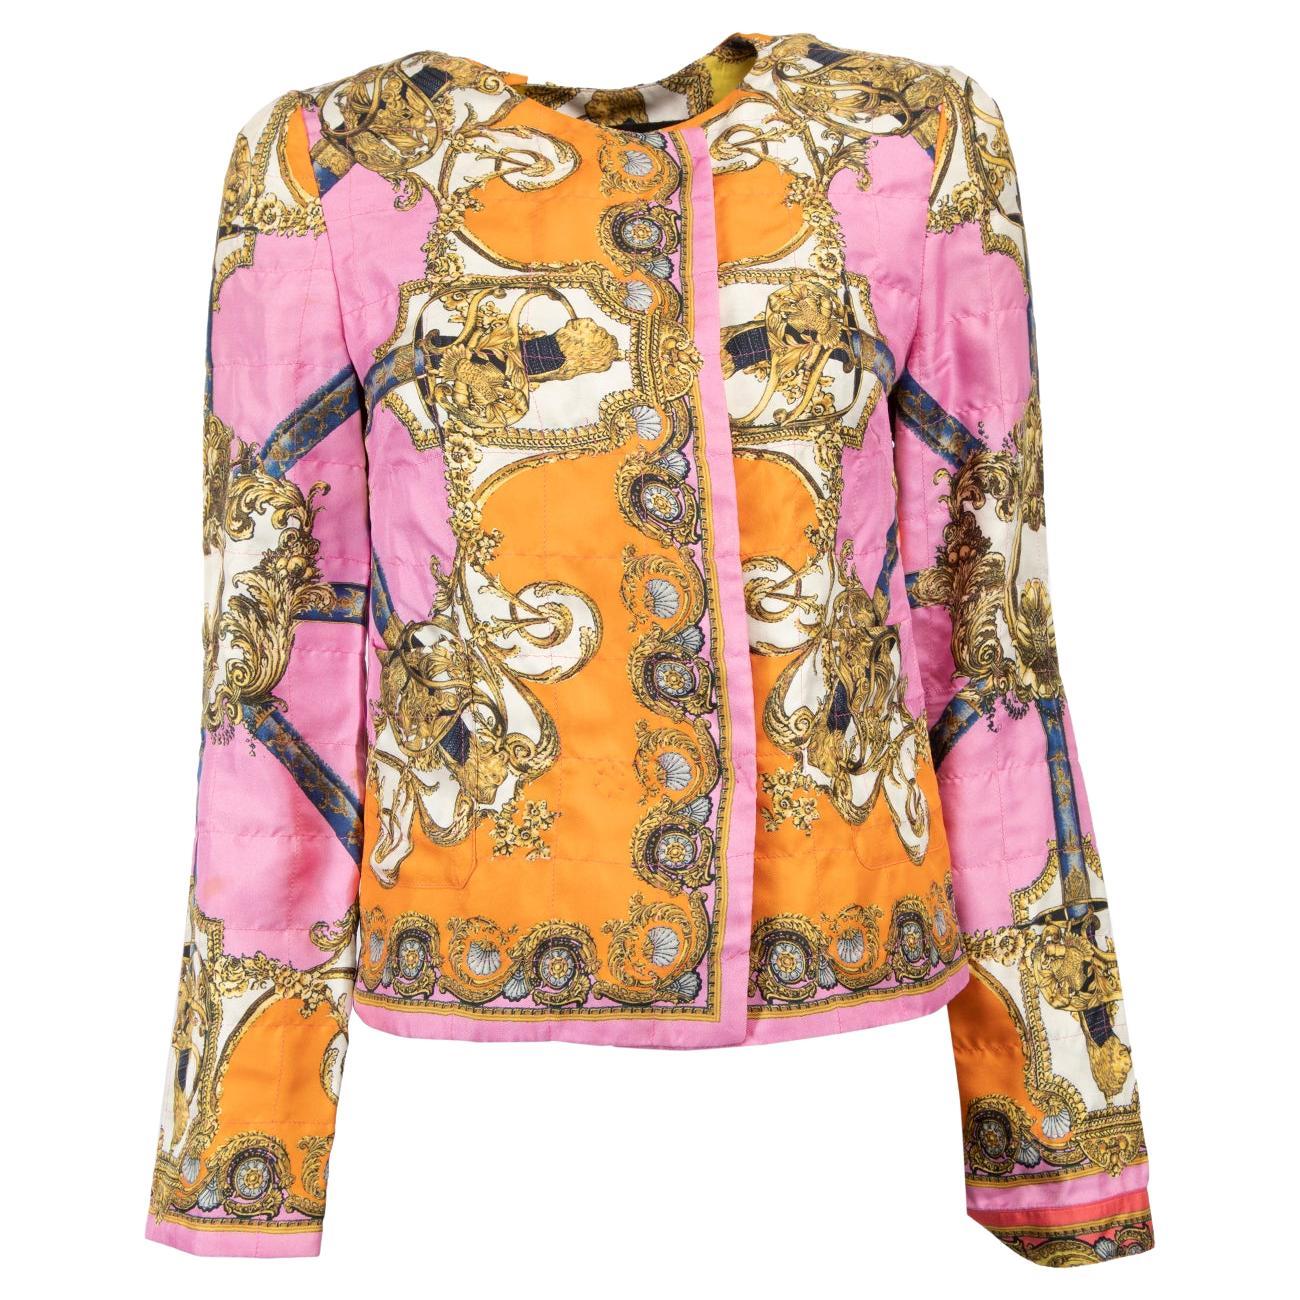 Dolce & Gabbana Women's Multicolour Lightweight Jacket with Pockets For Sale